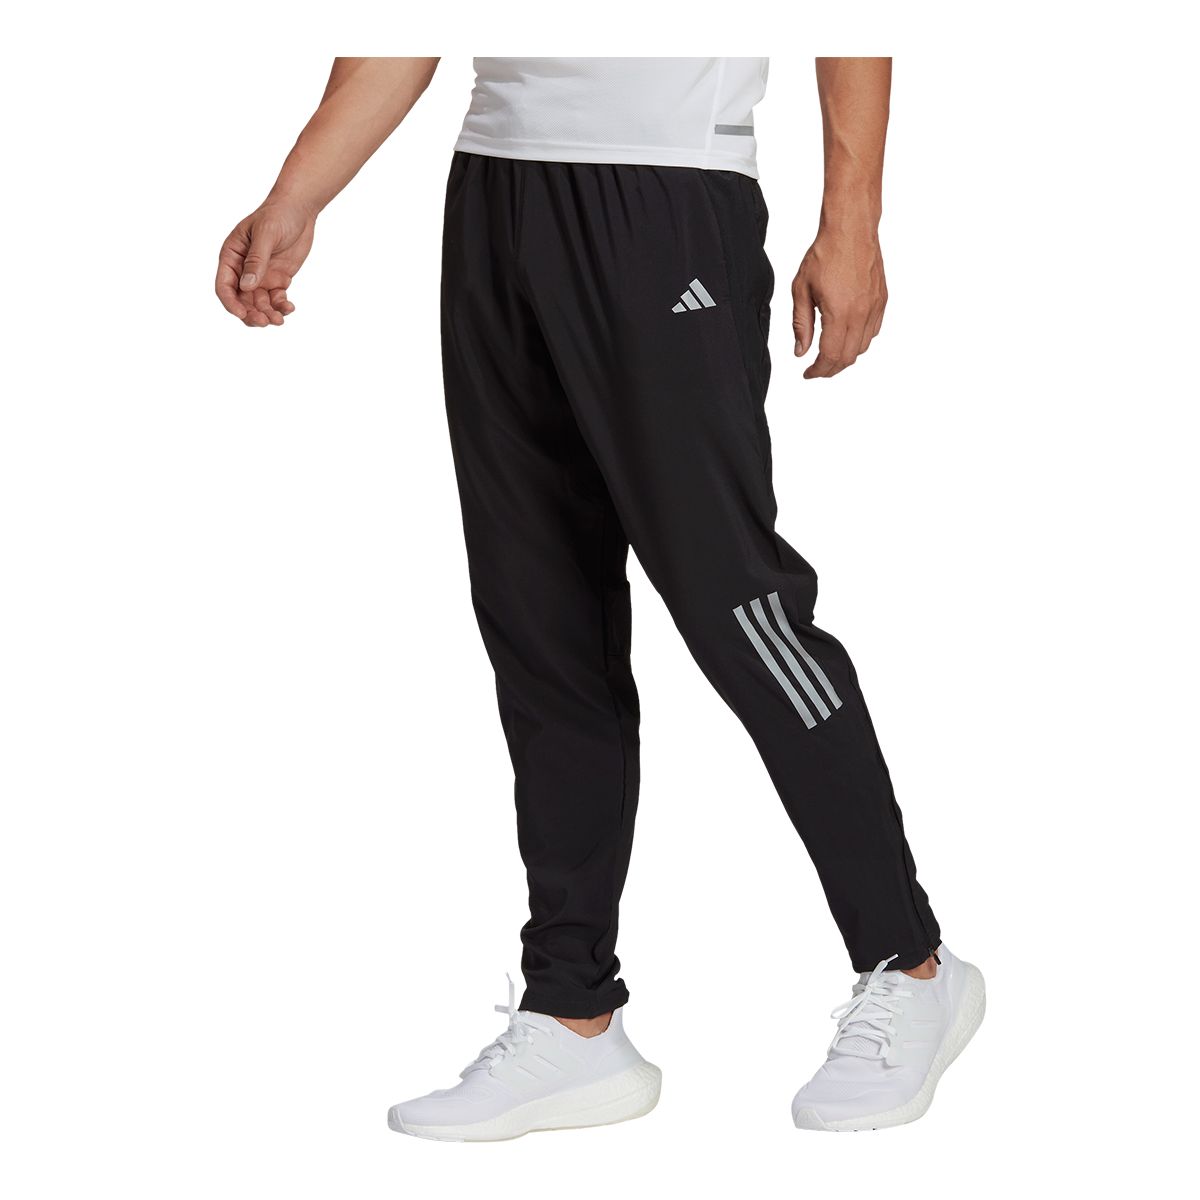 Image of adidas Men's Own The Run Astro Woven Pants